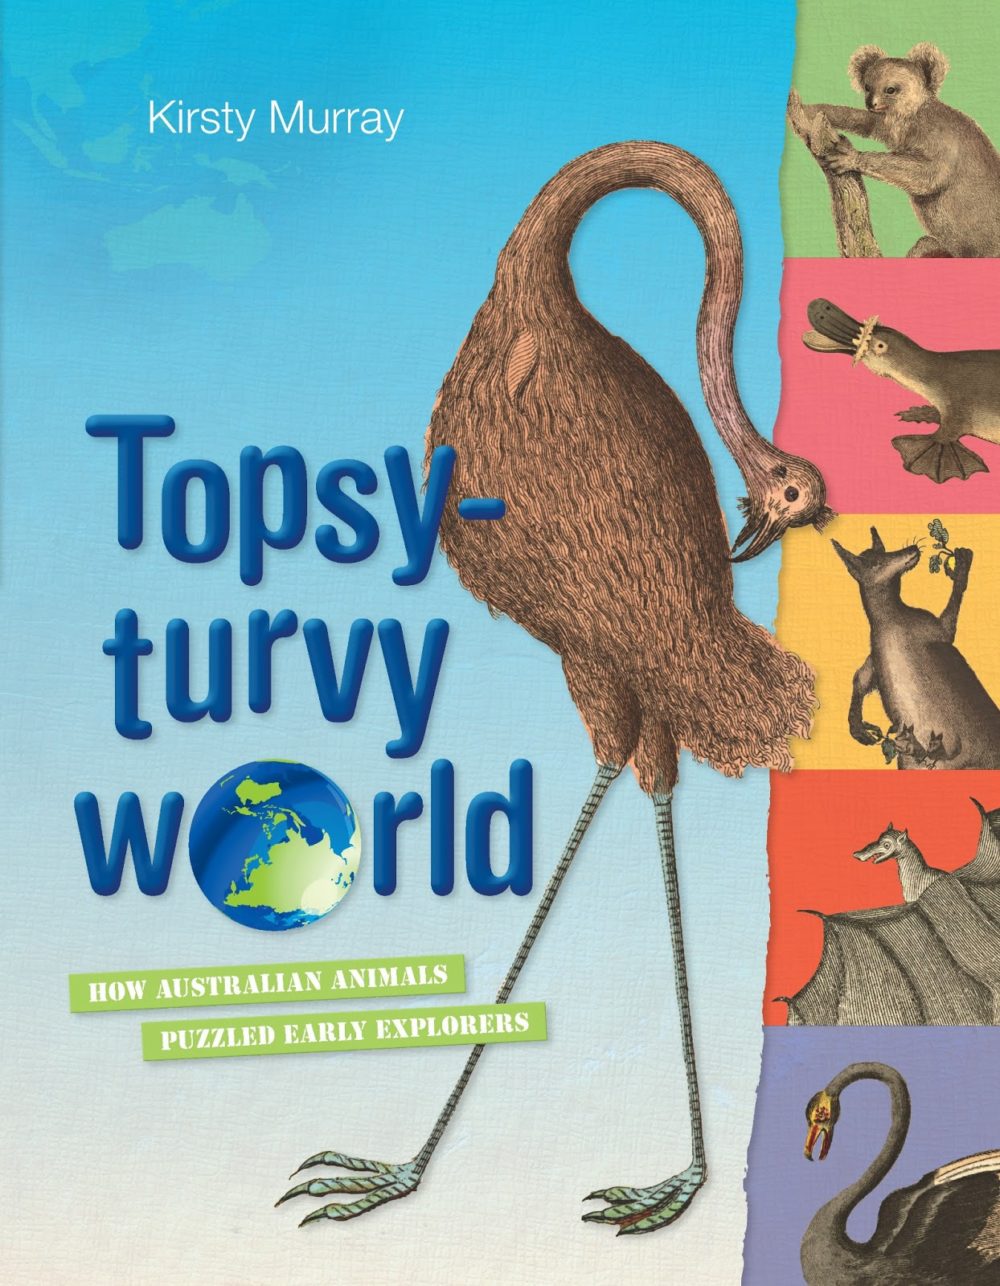 Book: Topsy-Turvy World by Kirsty Murray